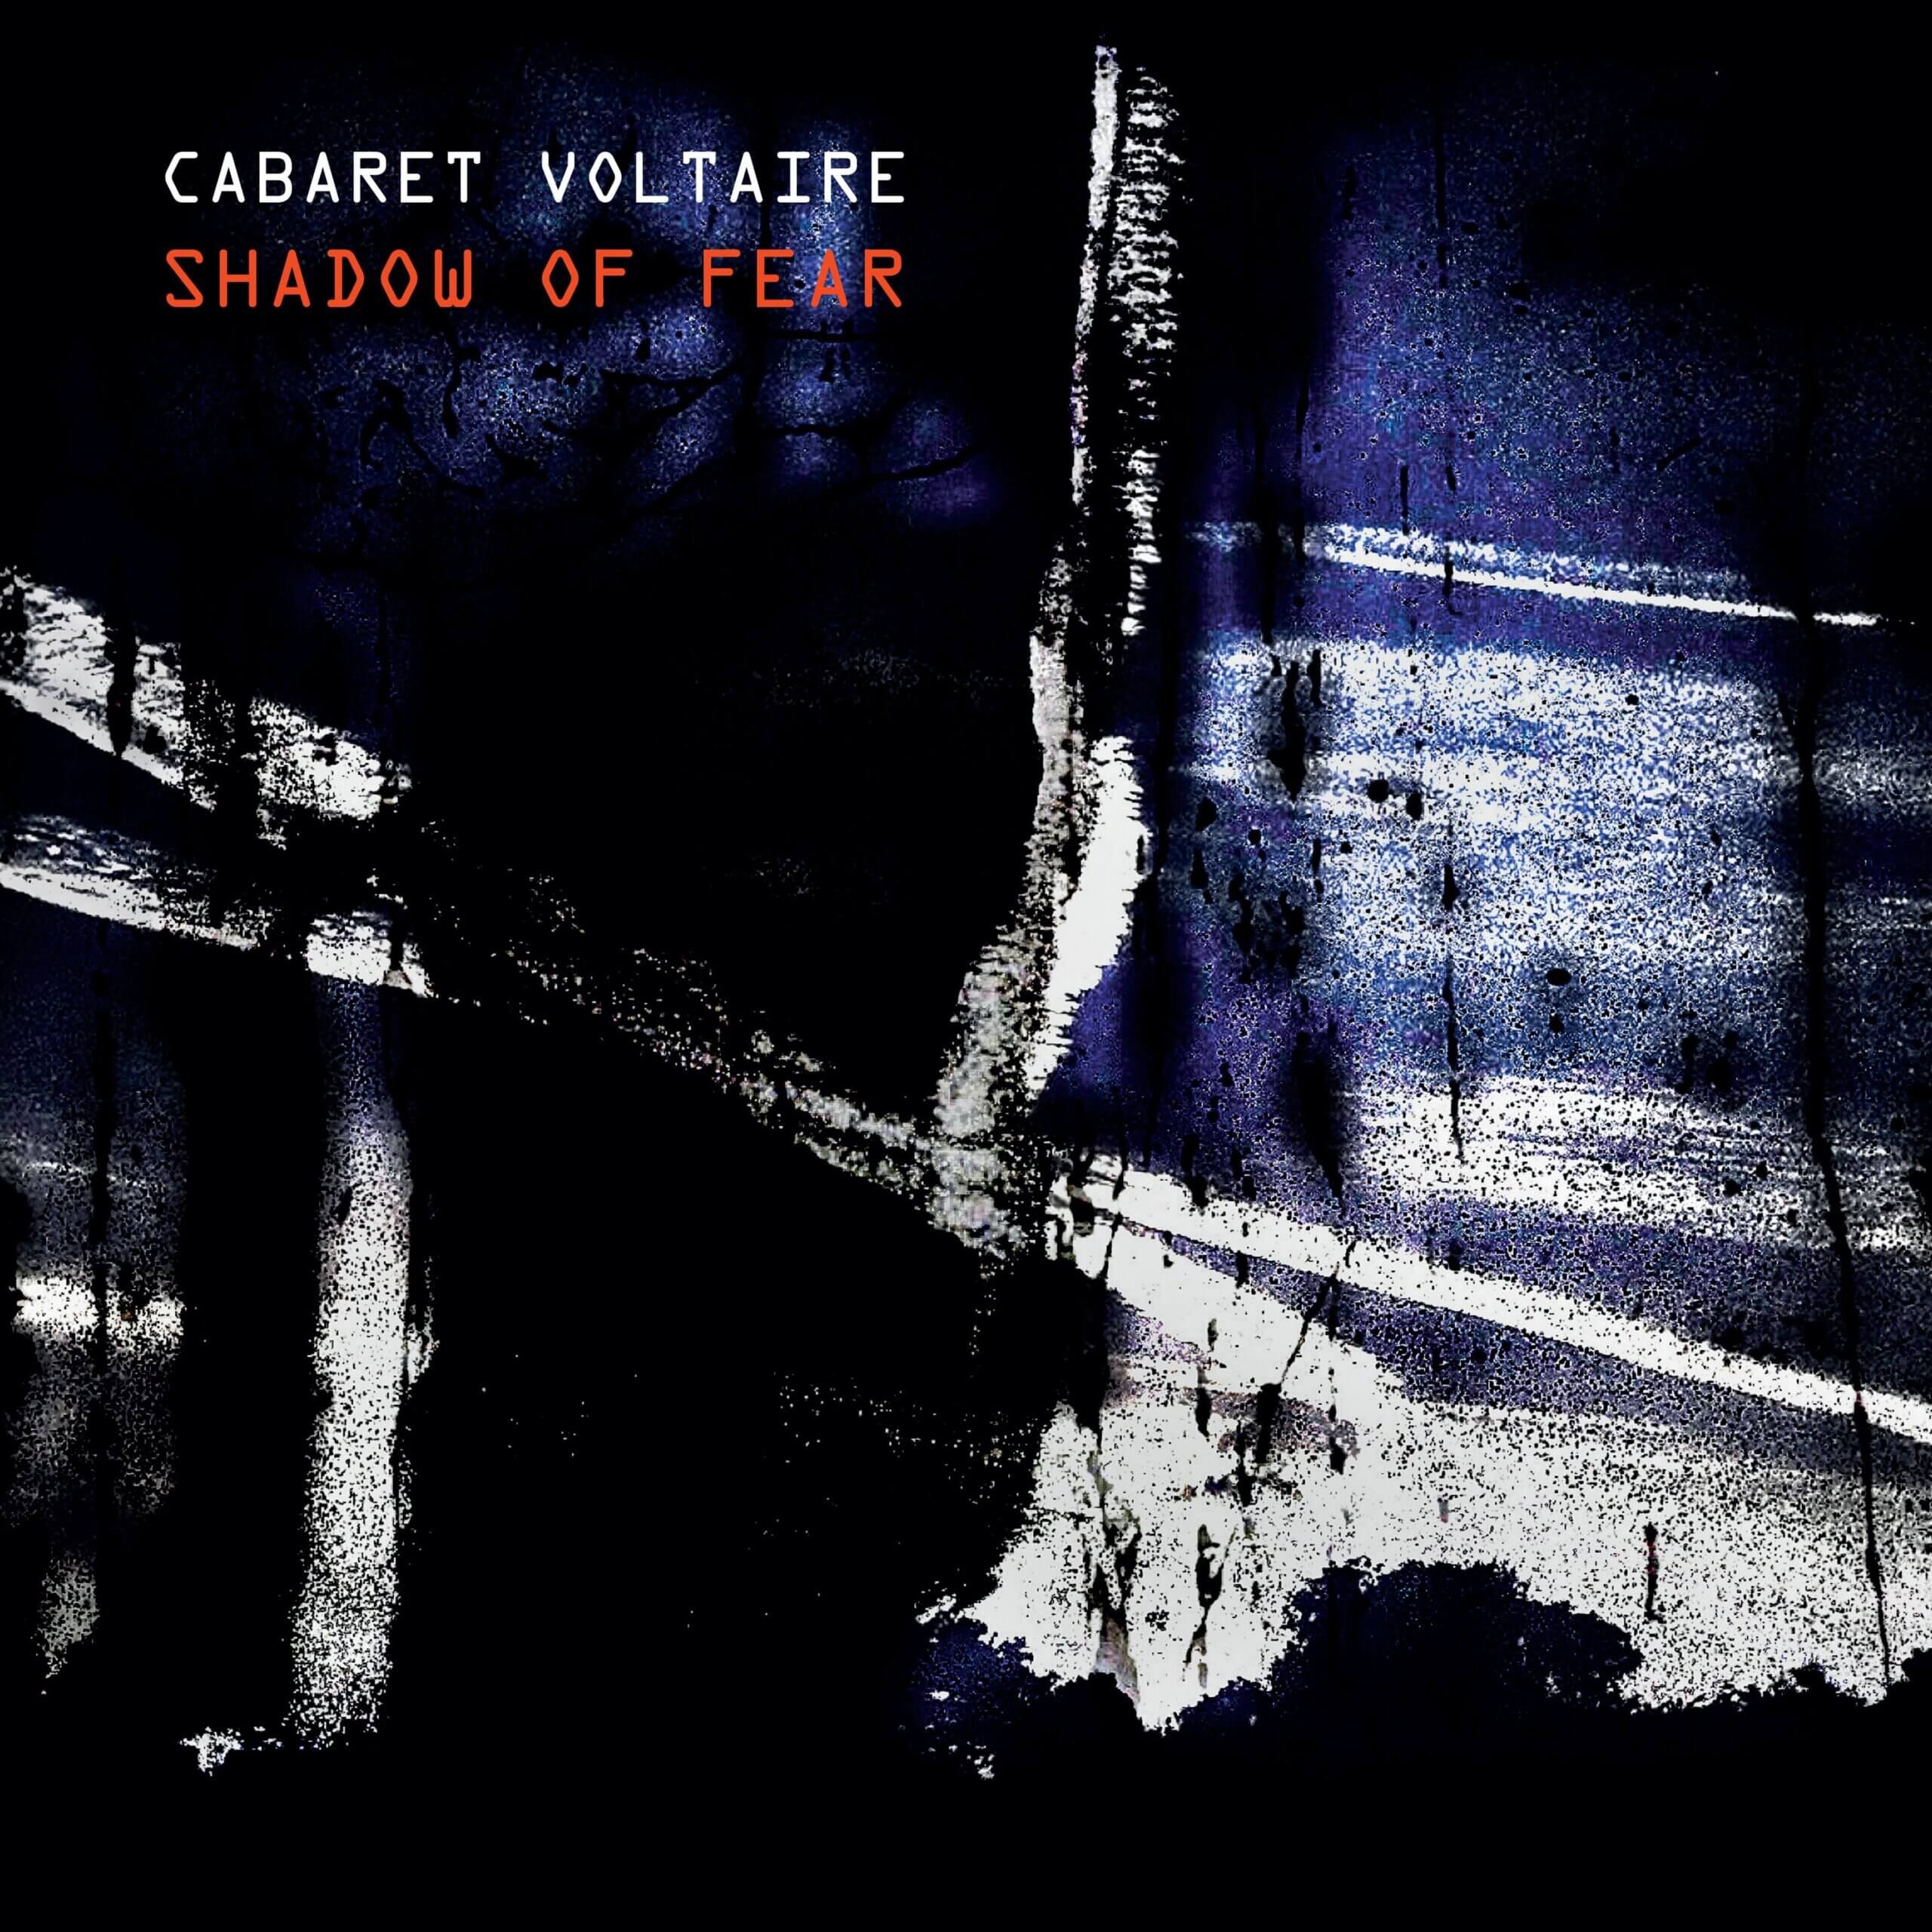 Shadow Of Fear by Cabaret Voltaire album review by Adam Fink. The legendary Mute recording artist's LP comes out on November 20th